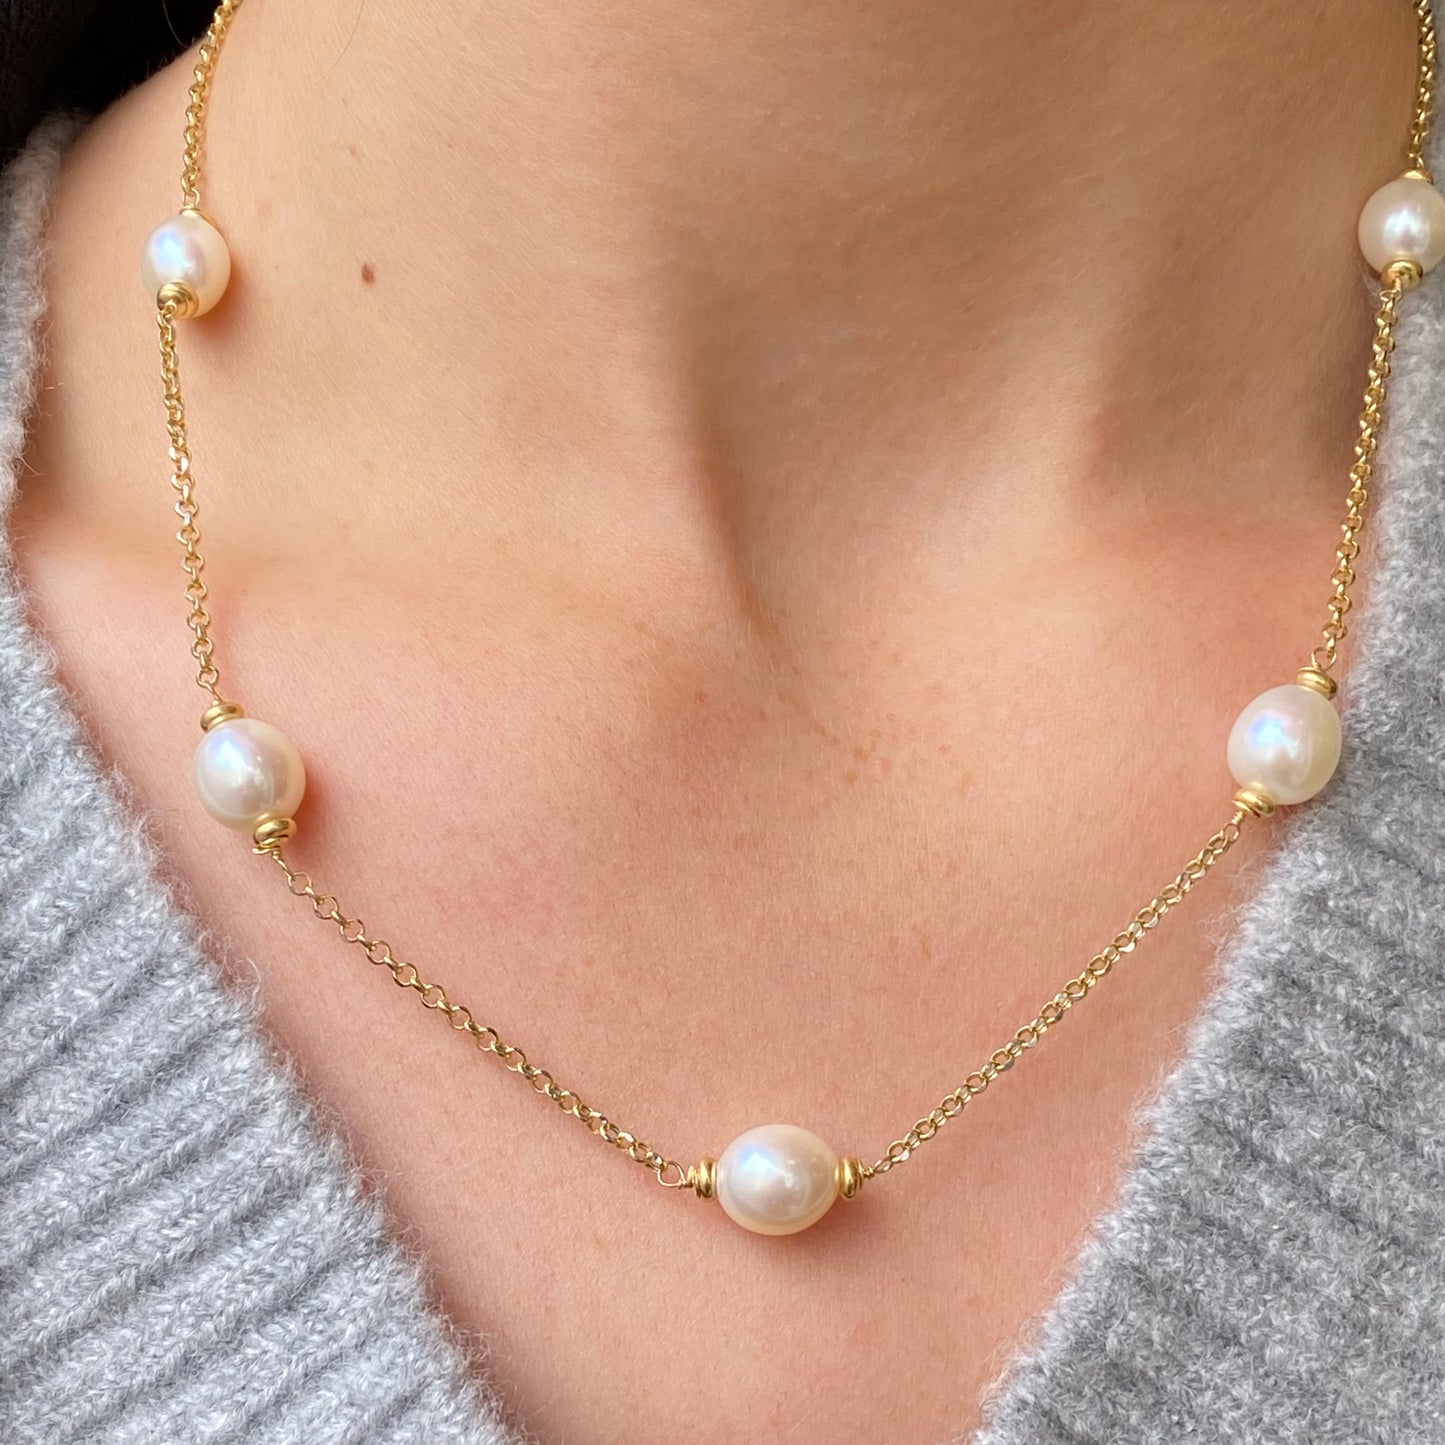 18ct Gold Mini Pearl & Chain Necklace - John Ross Jewellers